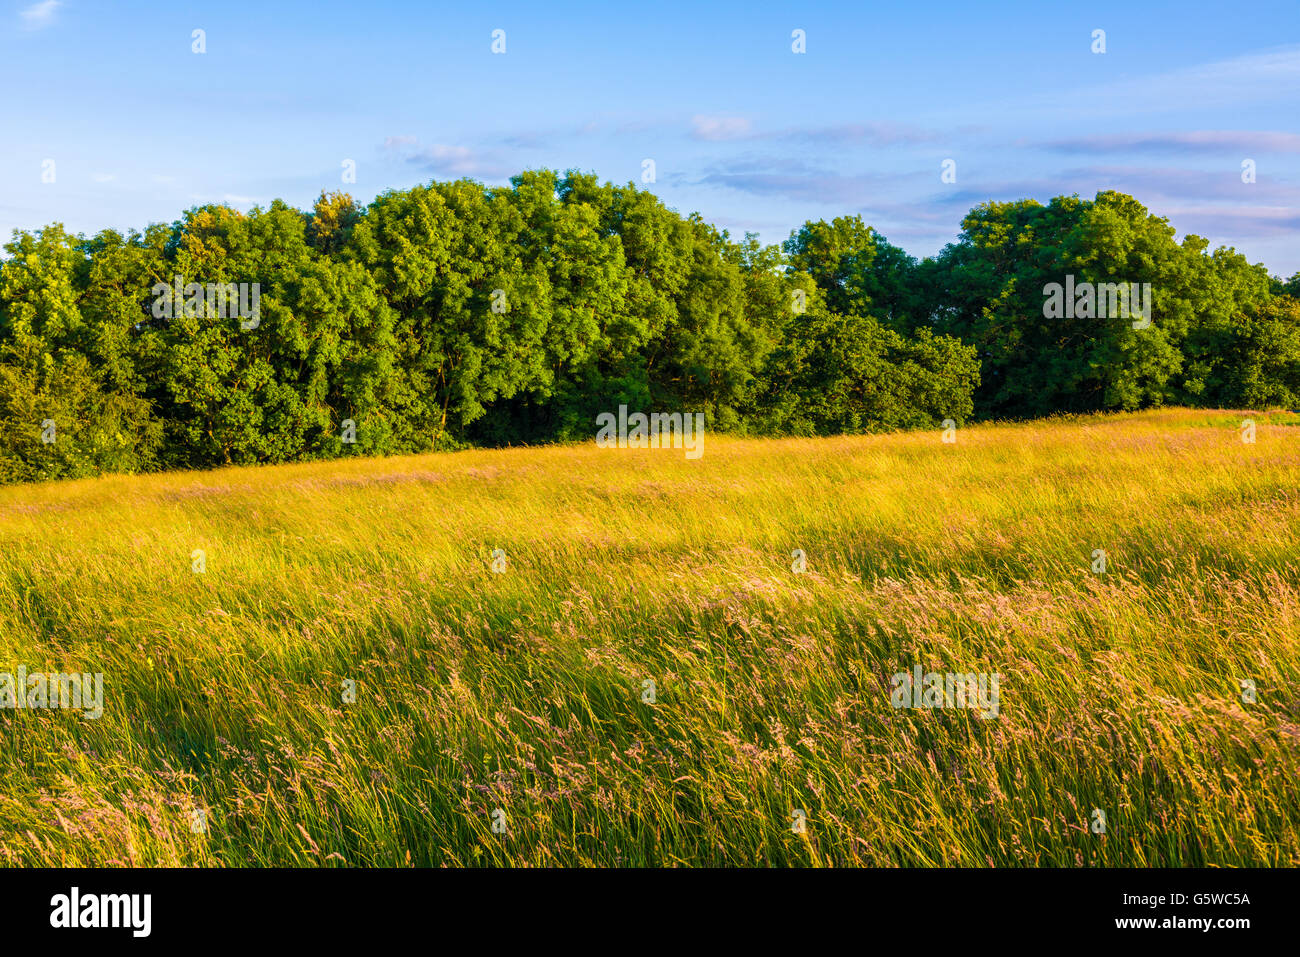 A meadow and trees in summer evening light. Ashton Court, Long Ashton, North Somerset, England. Stock Photo